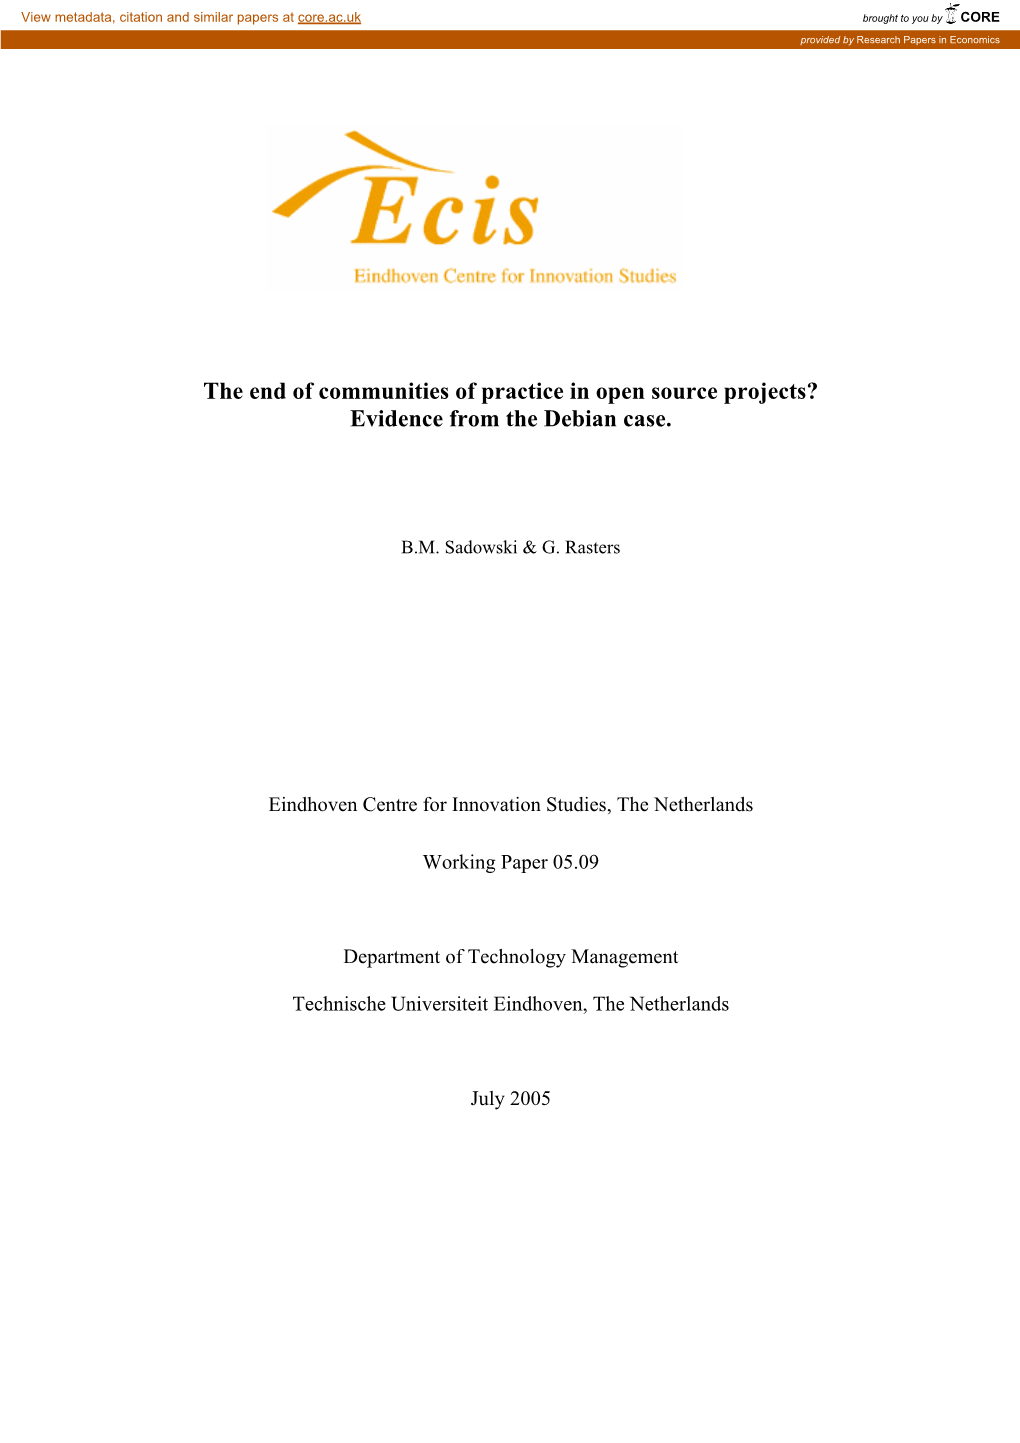 The End of Communities of Practice in Open Source Projects? Evidence from the Debian Case